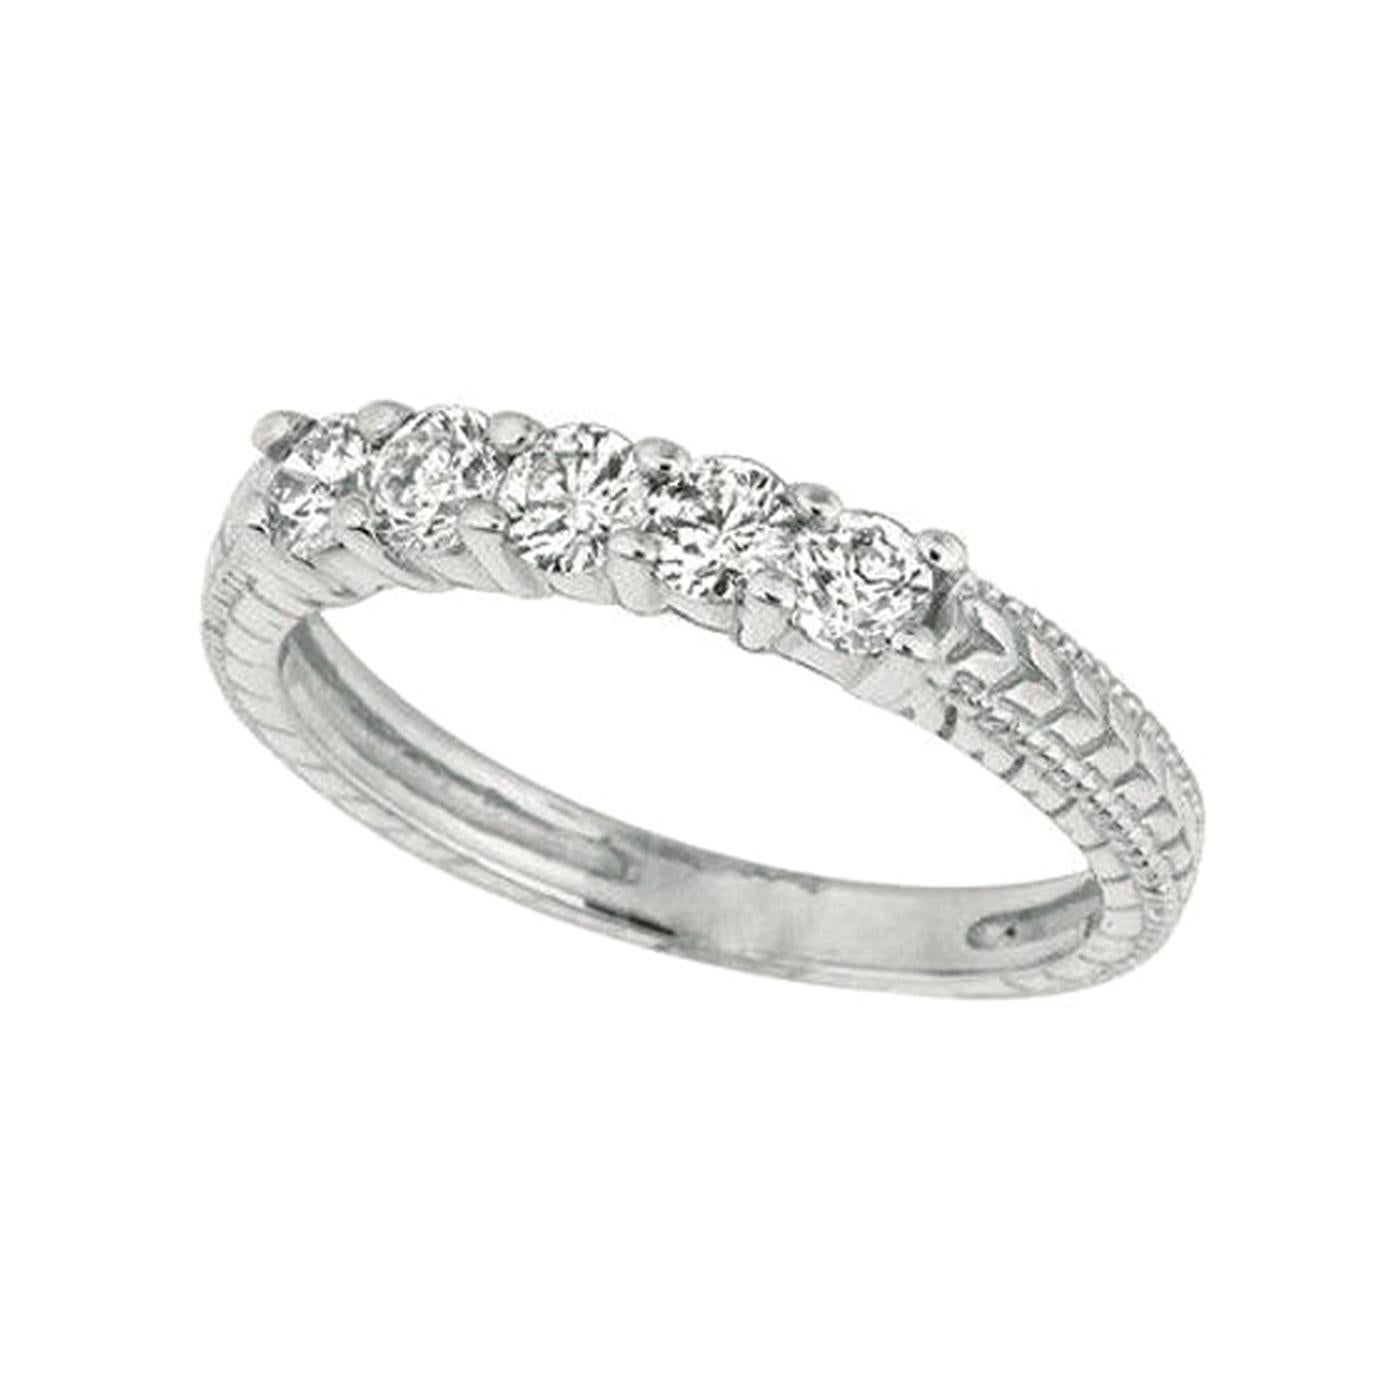 For Sale:  1.00 Carat Natural 5 Stone Diamond Ring Band 14K White Gold